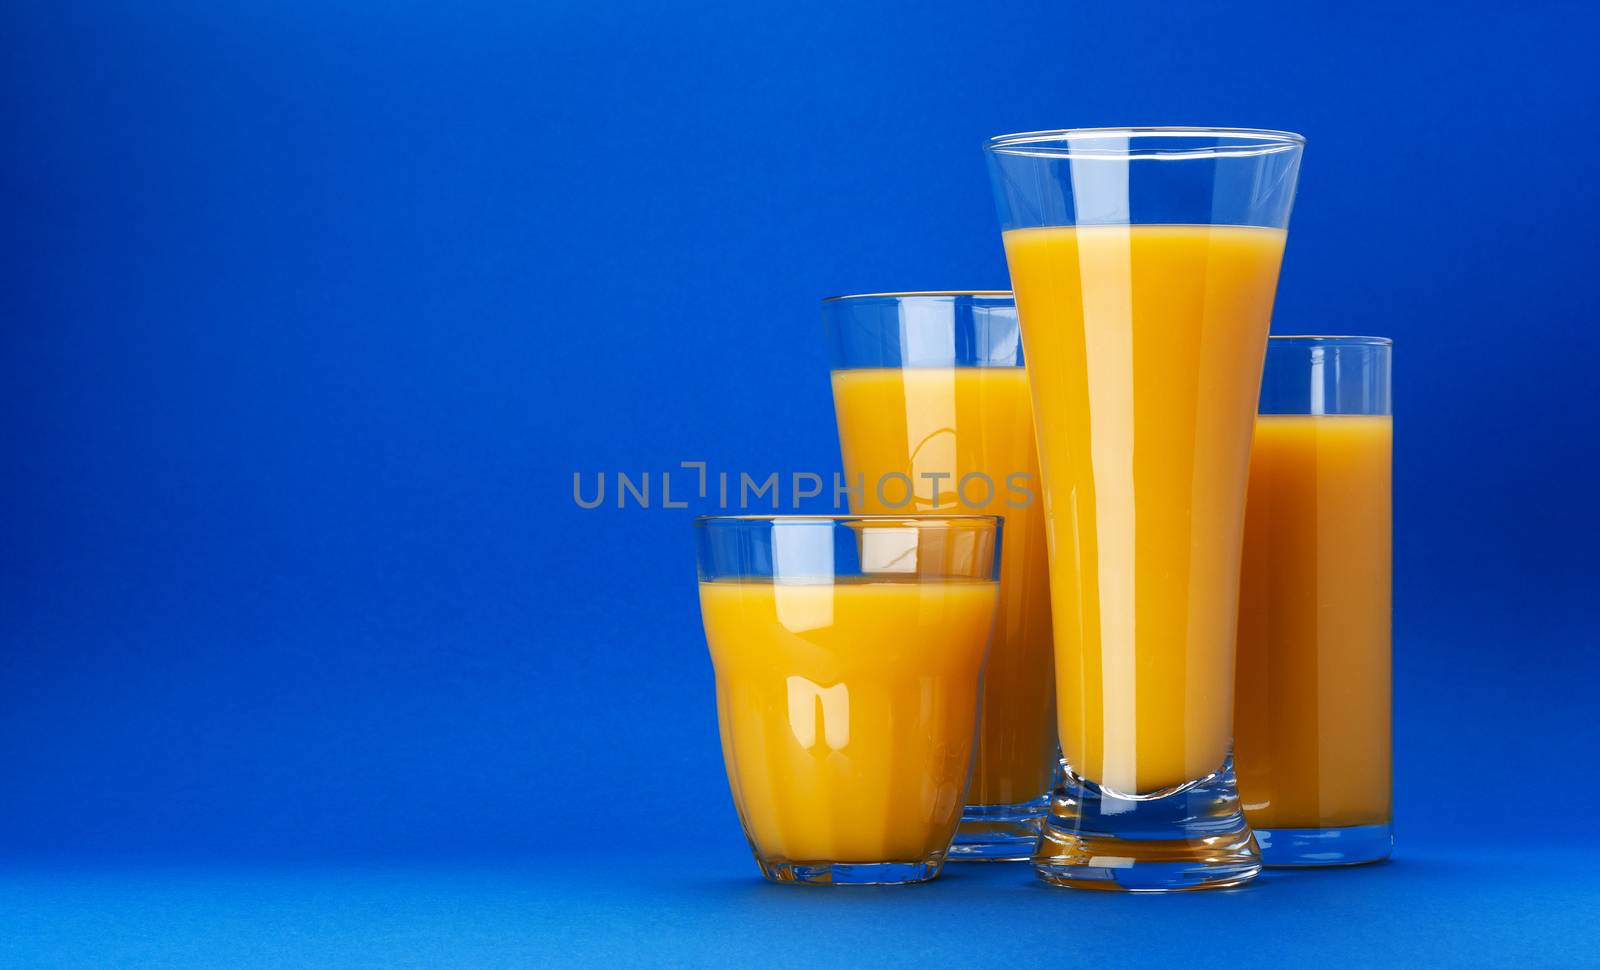 Orange juice in glass isolated on blue background with copy space. Fresh citrus juice, orange cocktail, healthy drink concept, close-up